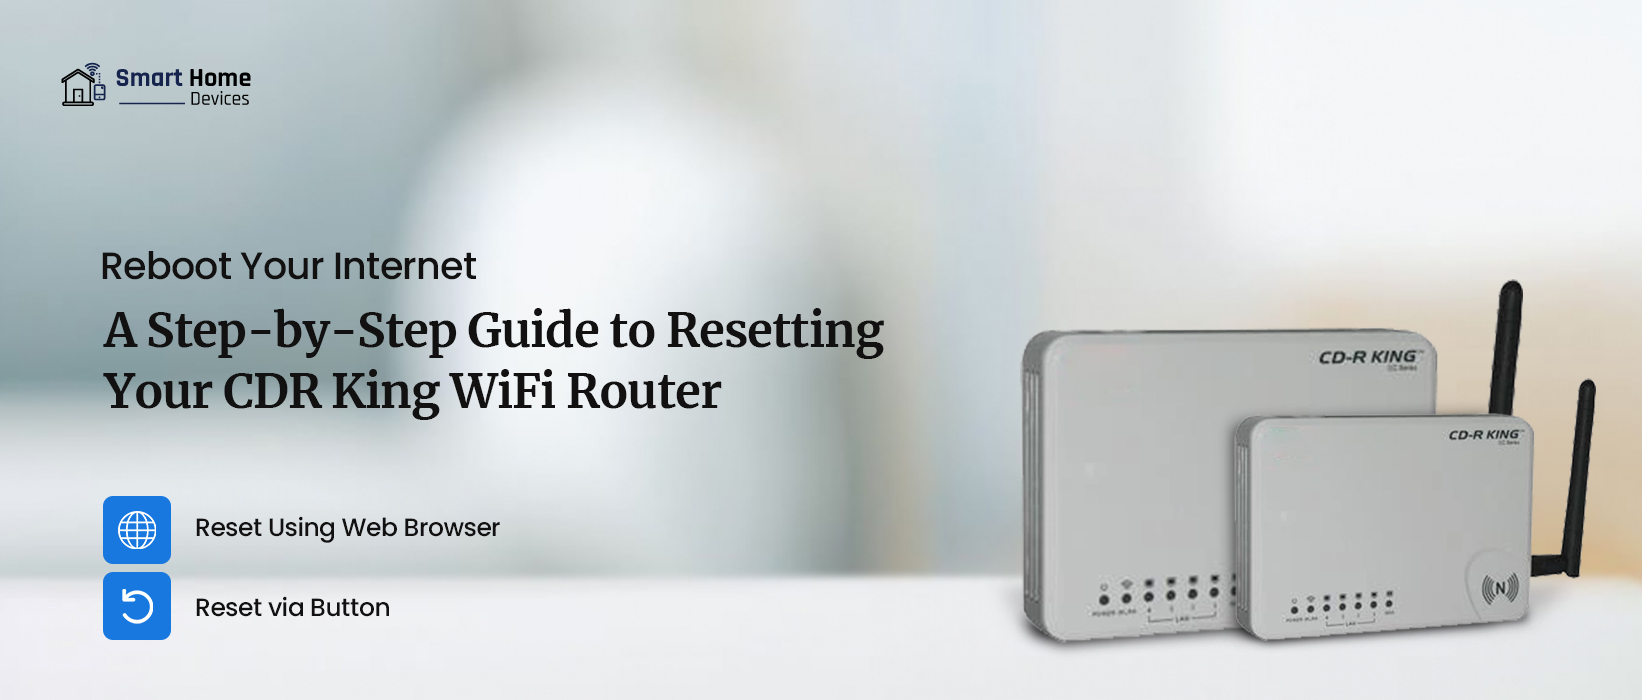 Reset CDR King WiFi Router